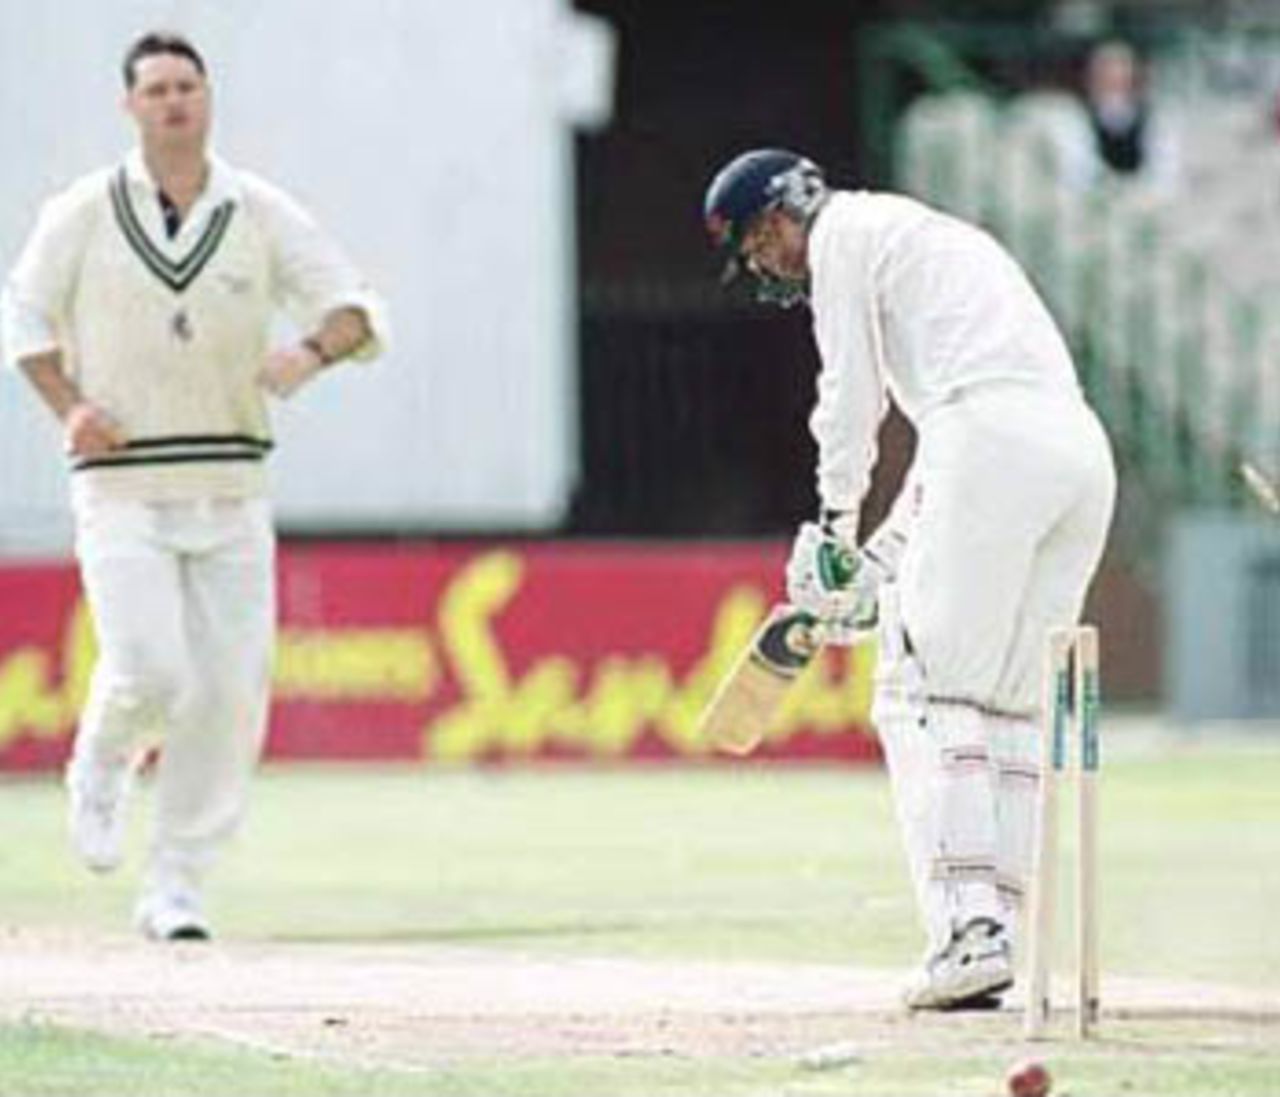 Joe Scuderi is bowled out by Martin McCague, PPP healthcare County Championship Division One, 2000, Lancashire v Kent, Old Trafford, Manchester, 17-20 August 2000(Day 2).